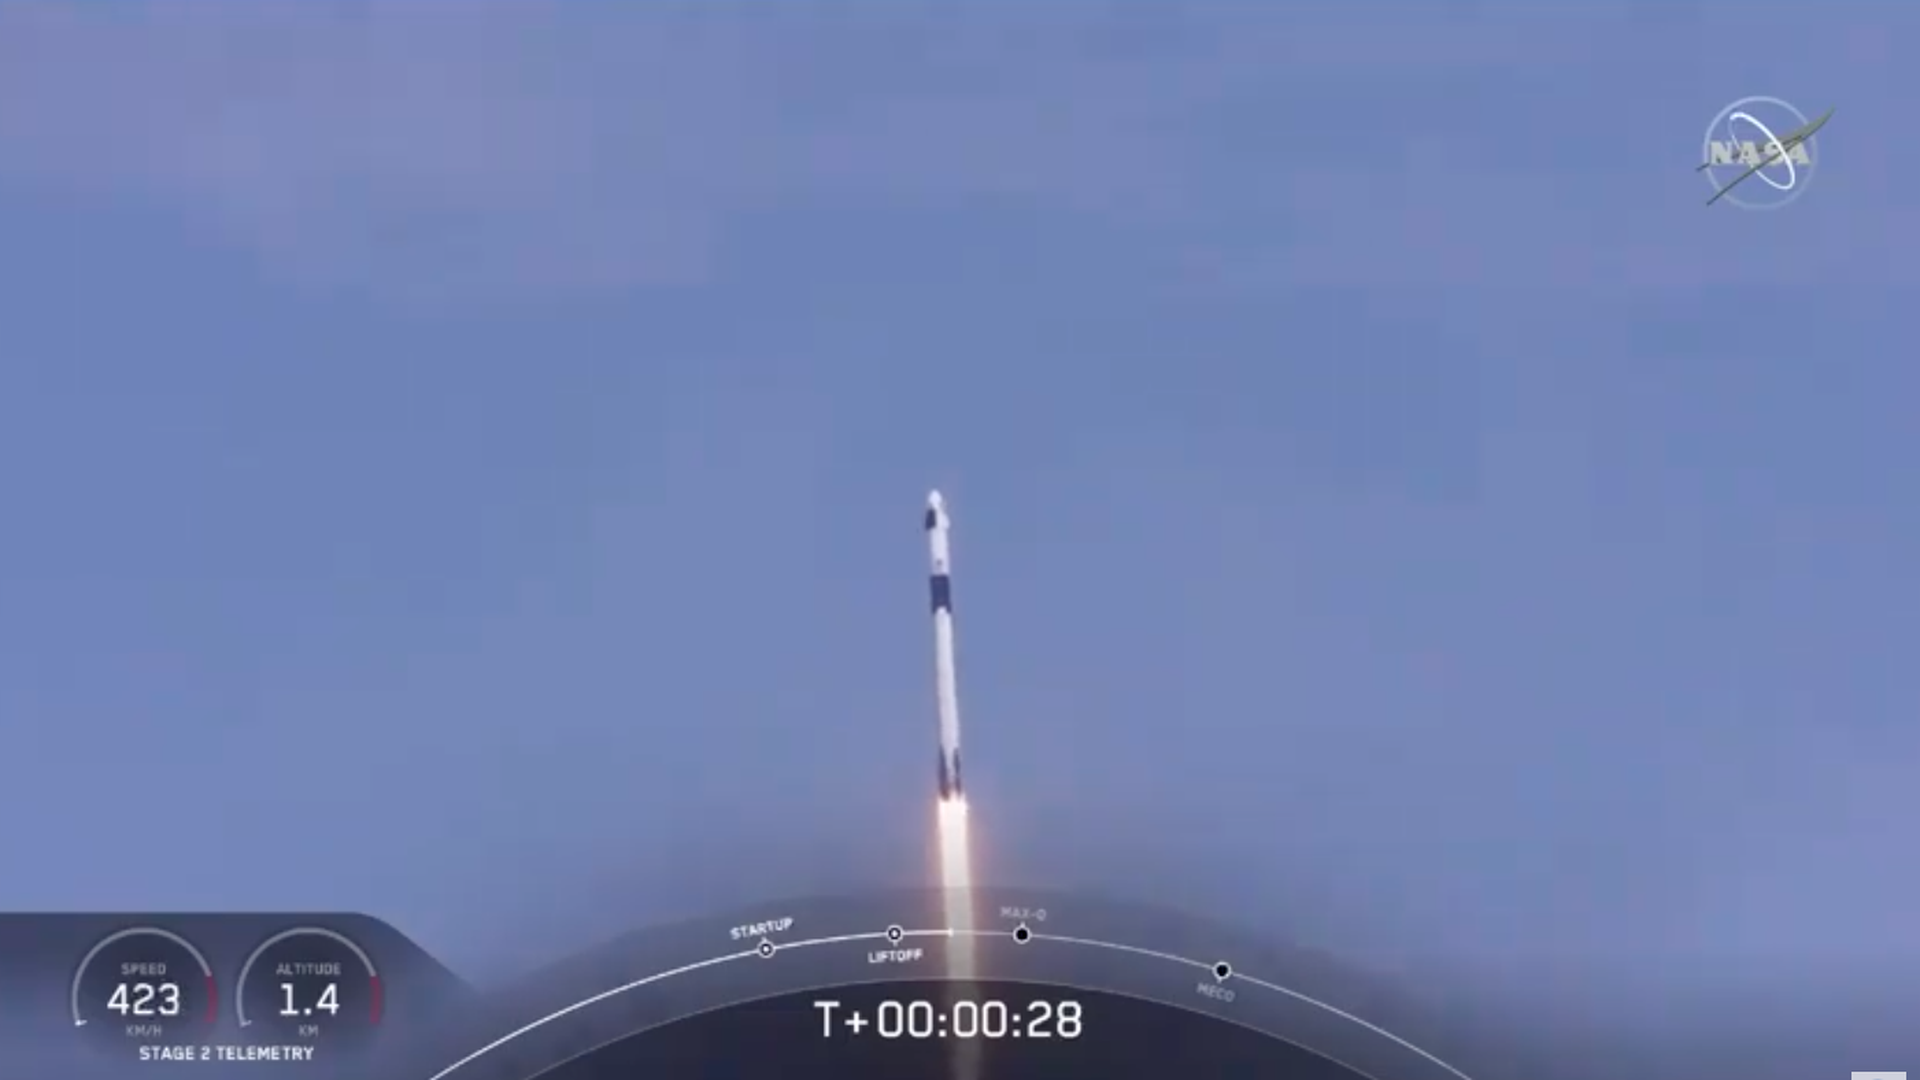 The Falcon 9 lifting off